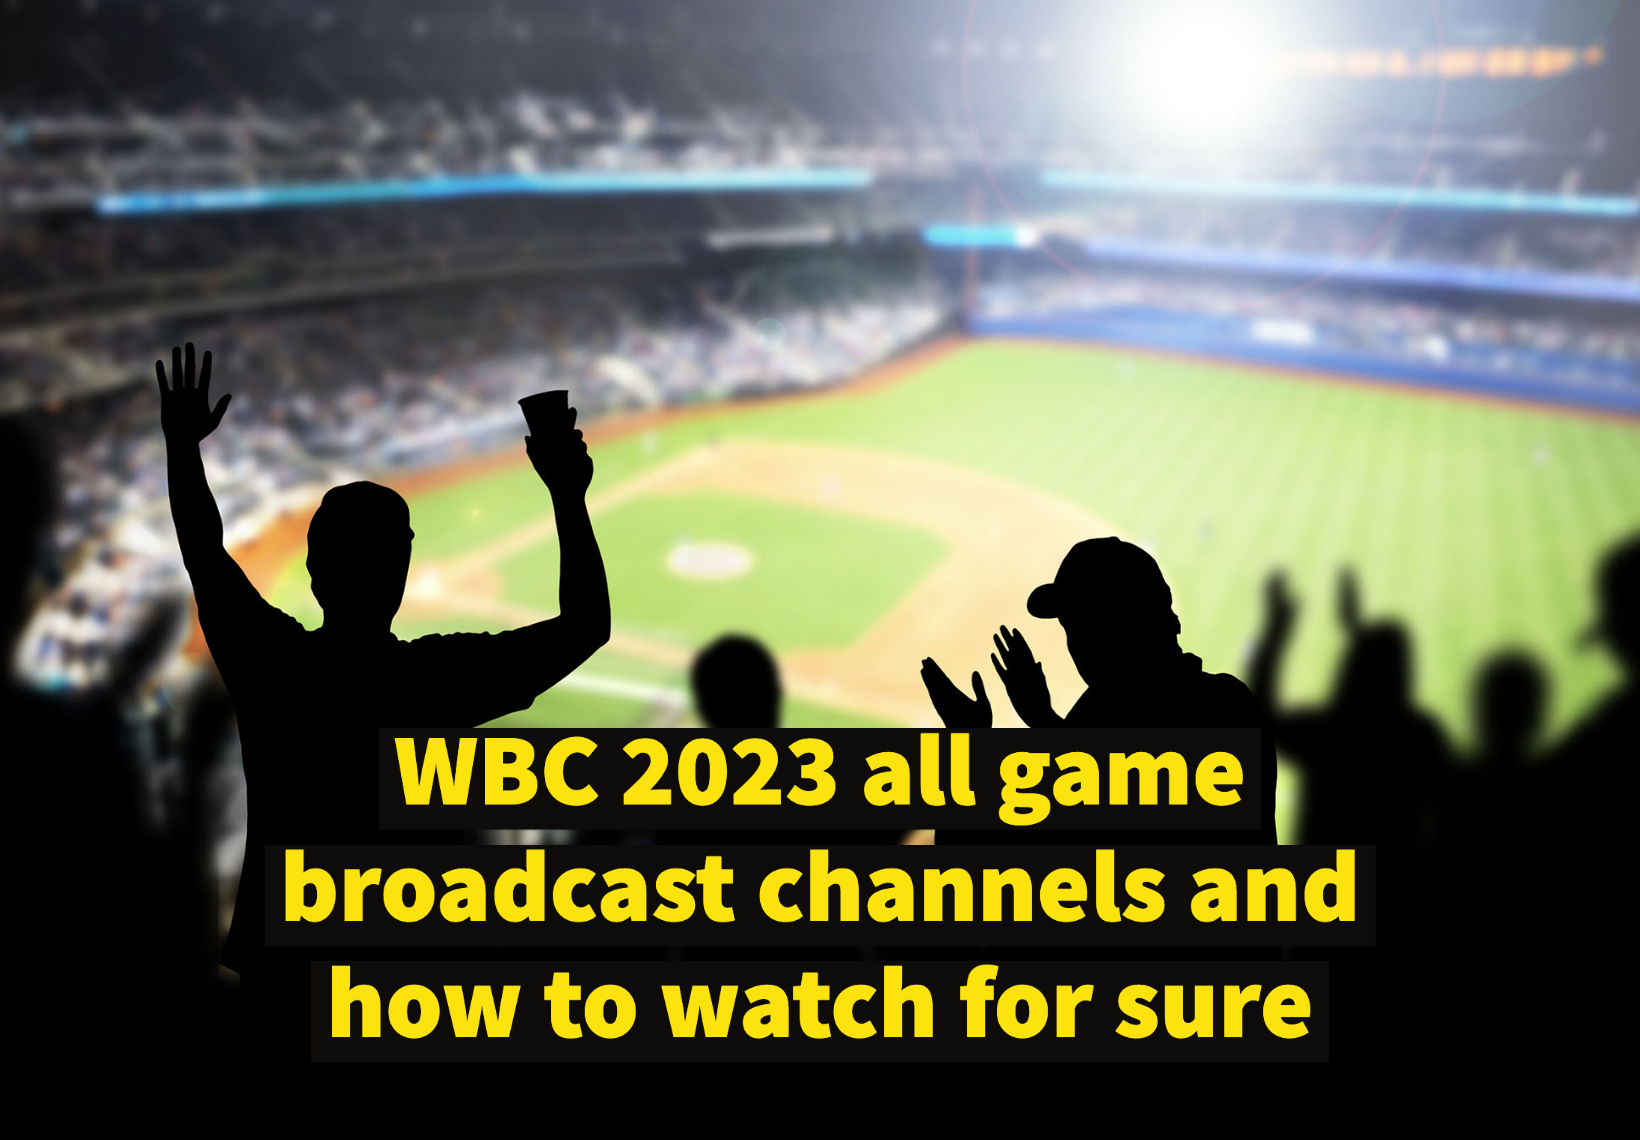 How to watch wbc 2023 treaming live